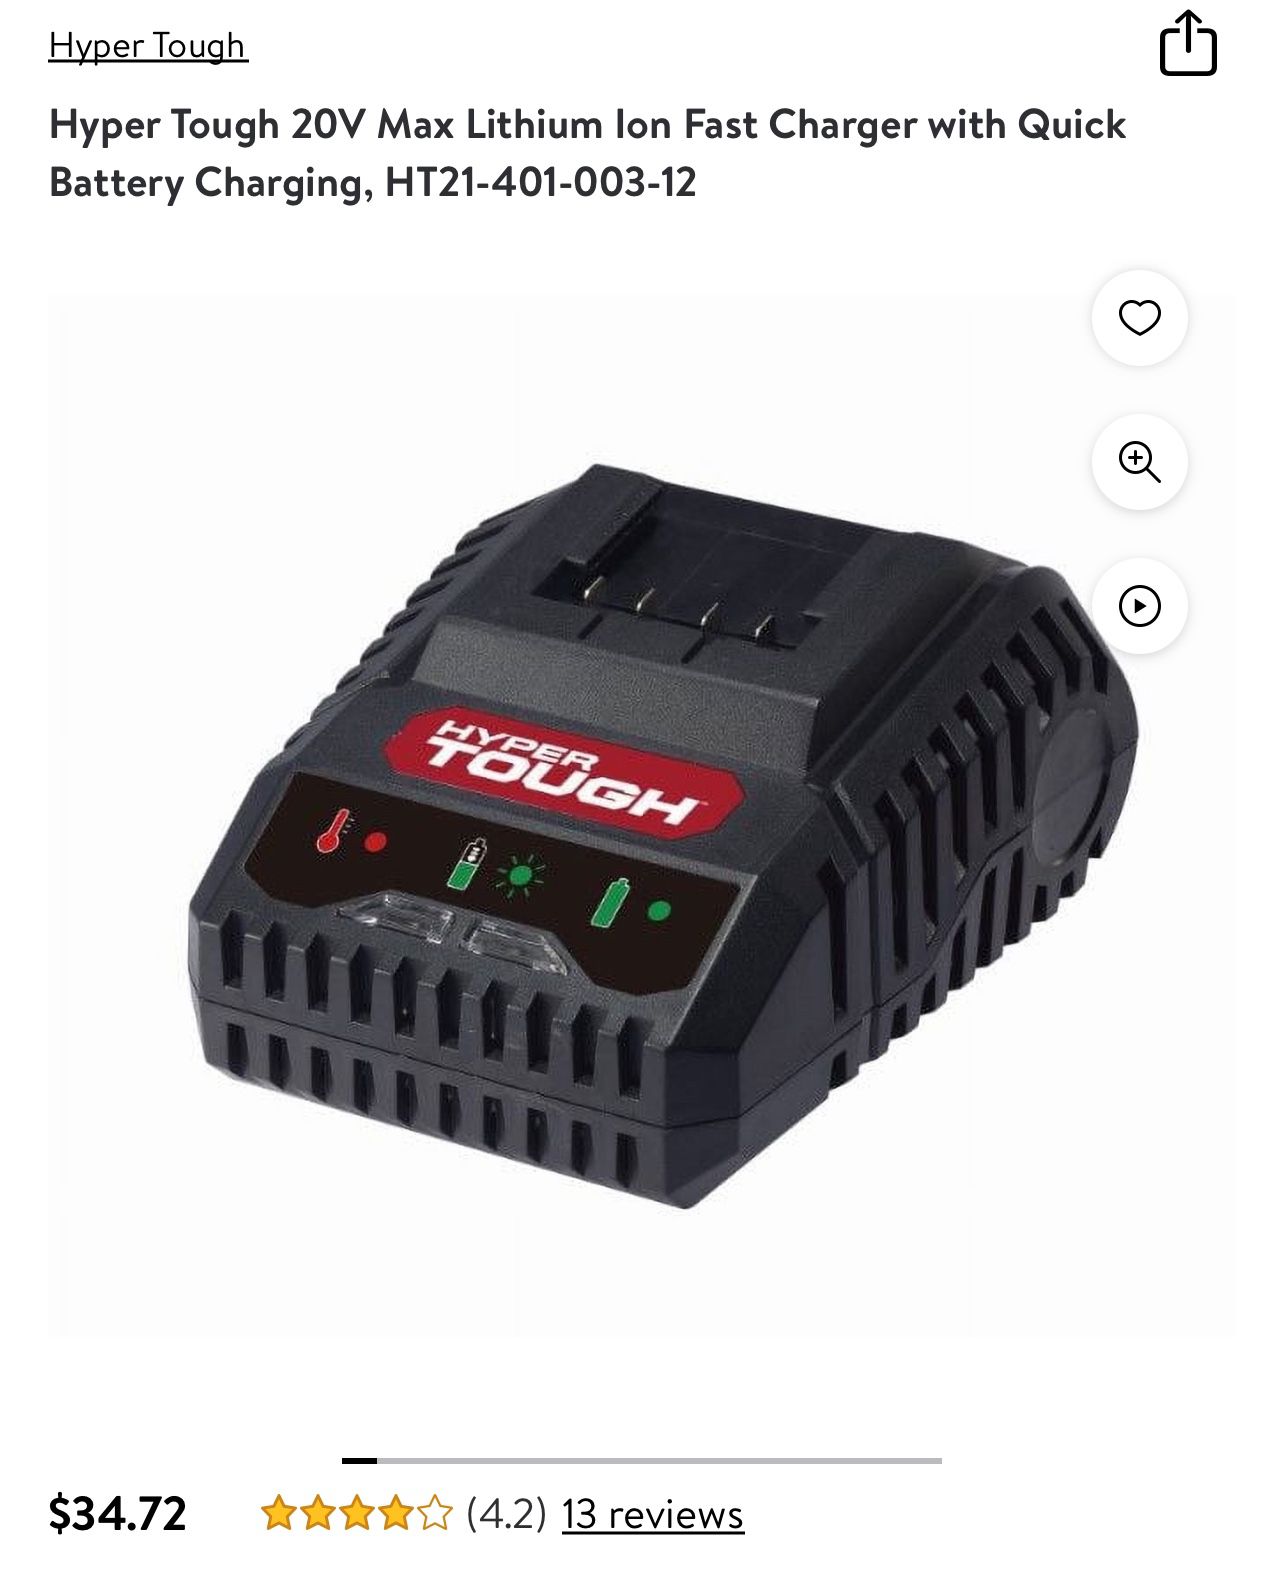 brand new Hyper Tough 20V Max Lithium Ion Fast Charger with Quick Battery Charging